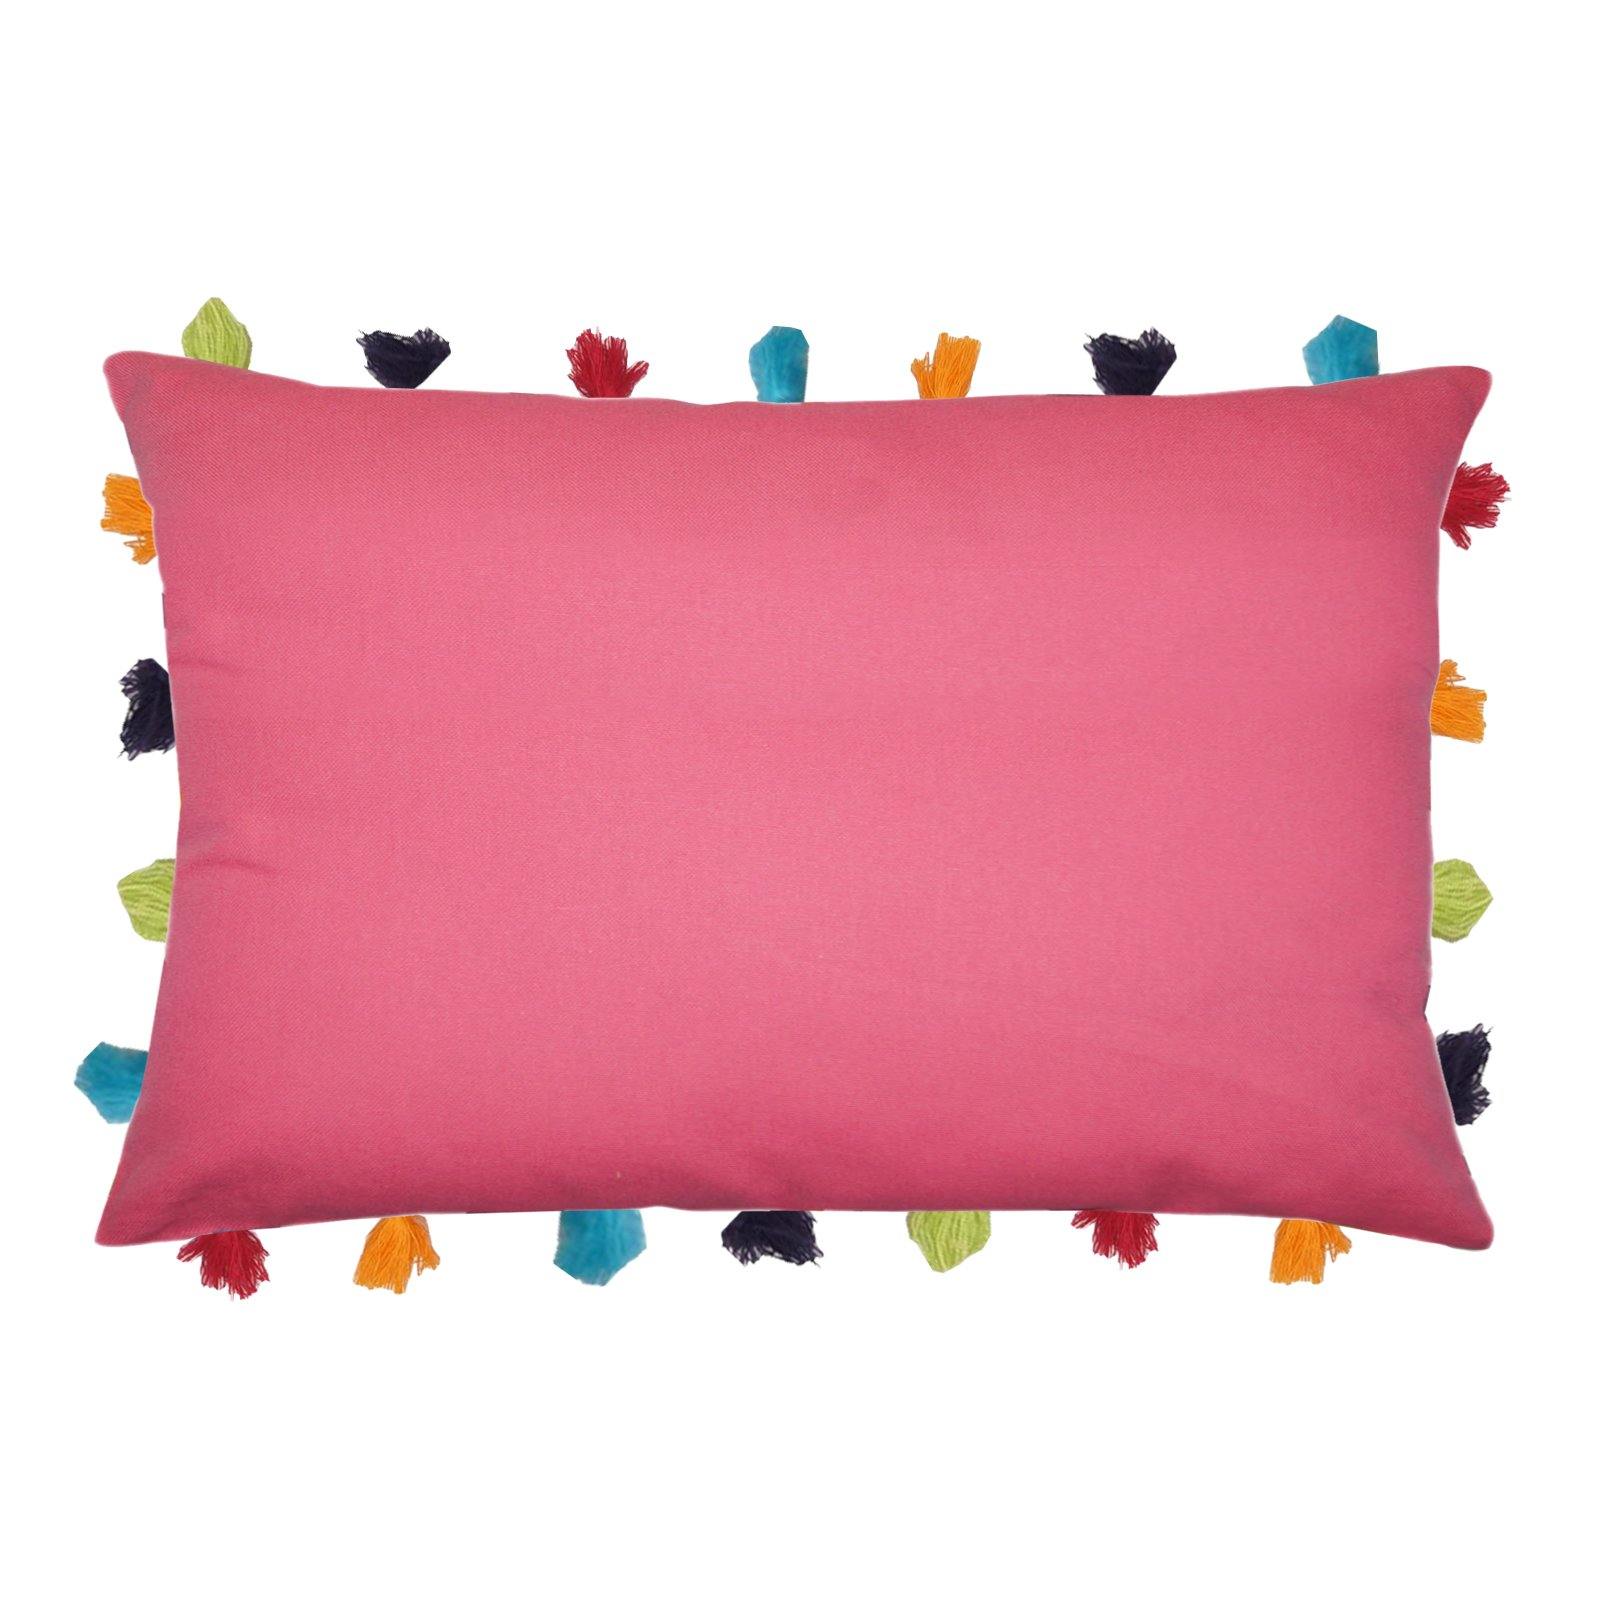 Lushomes Rasberry Cushion Cover with Colorful tassels (Single pc, 14 x 20”) - Lushomes